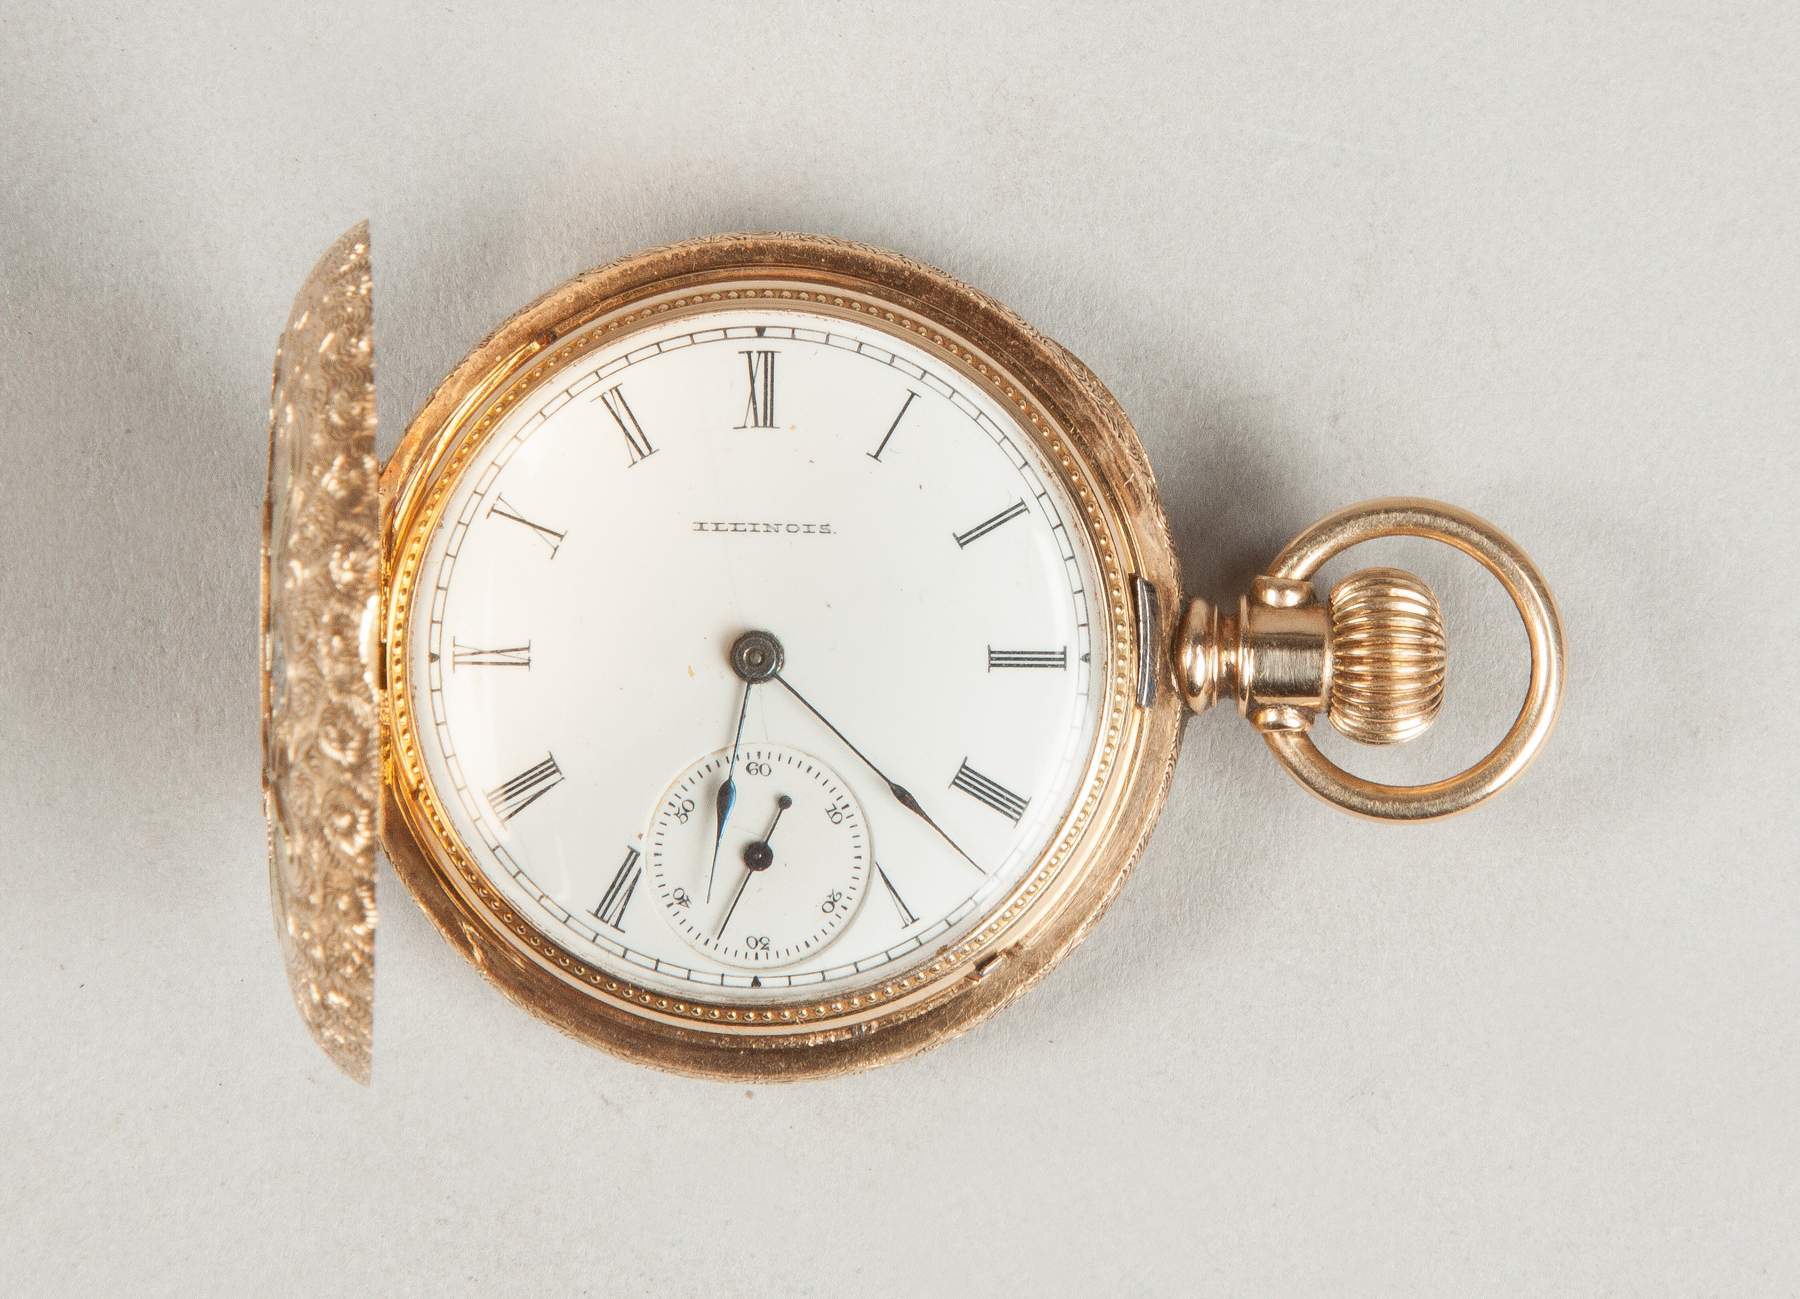 Illinois Watch Co., Springfield, 14K Gold Pocket Watch Cottone Auctions